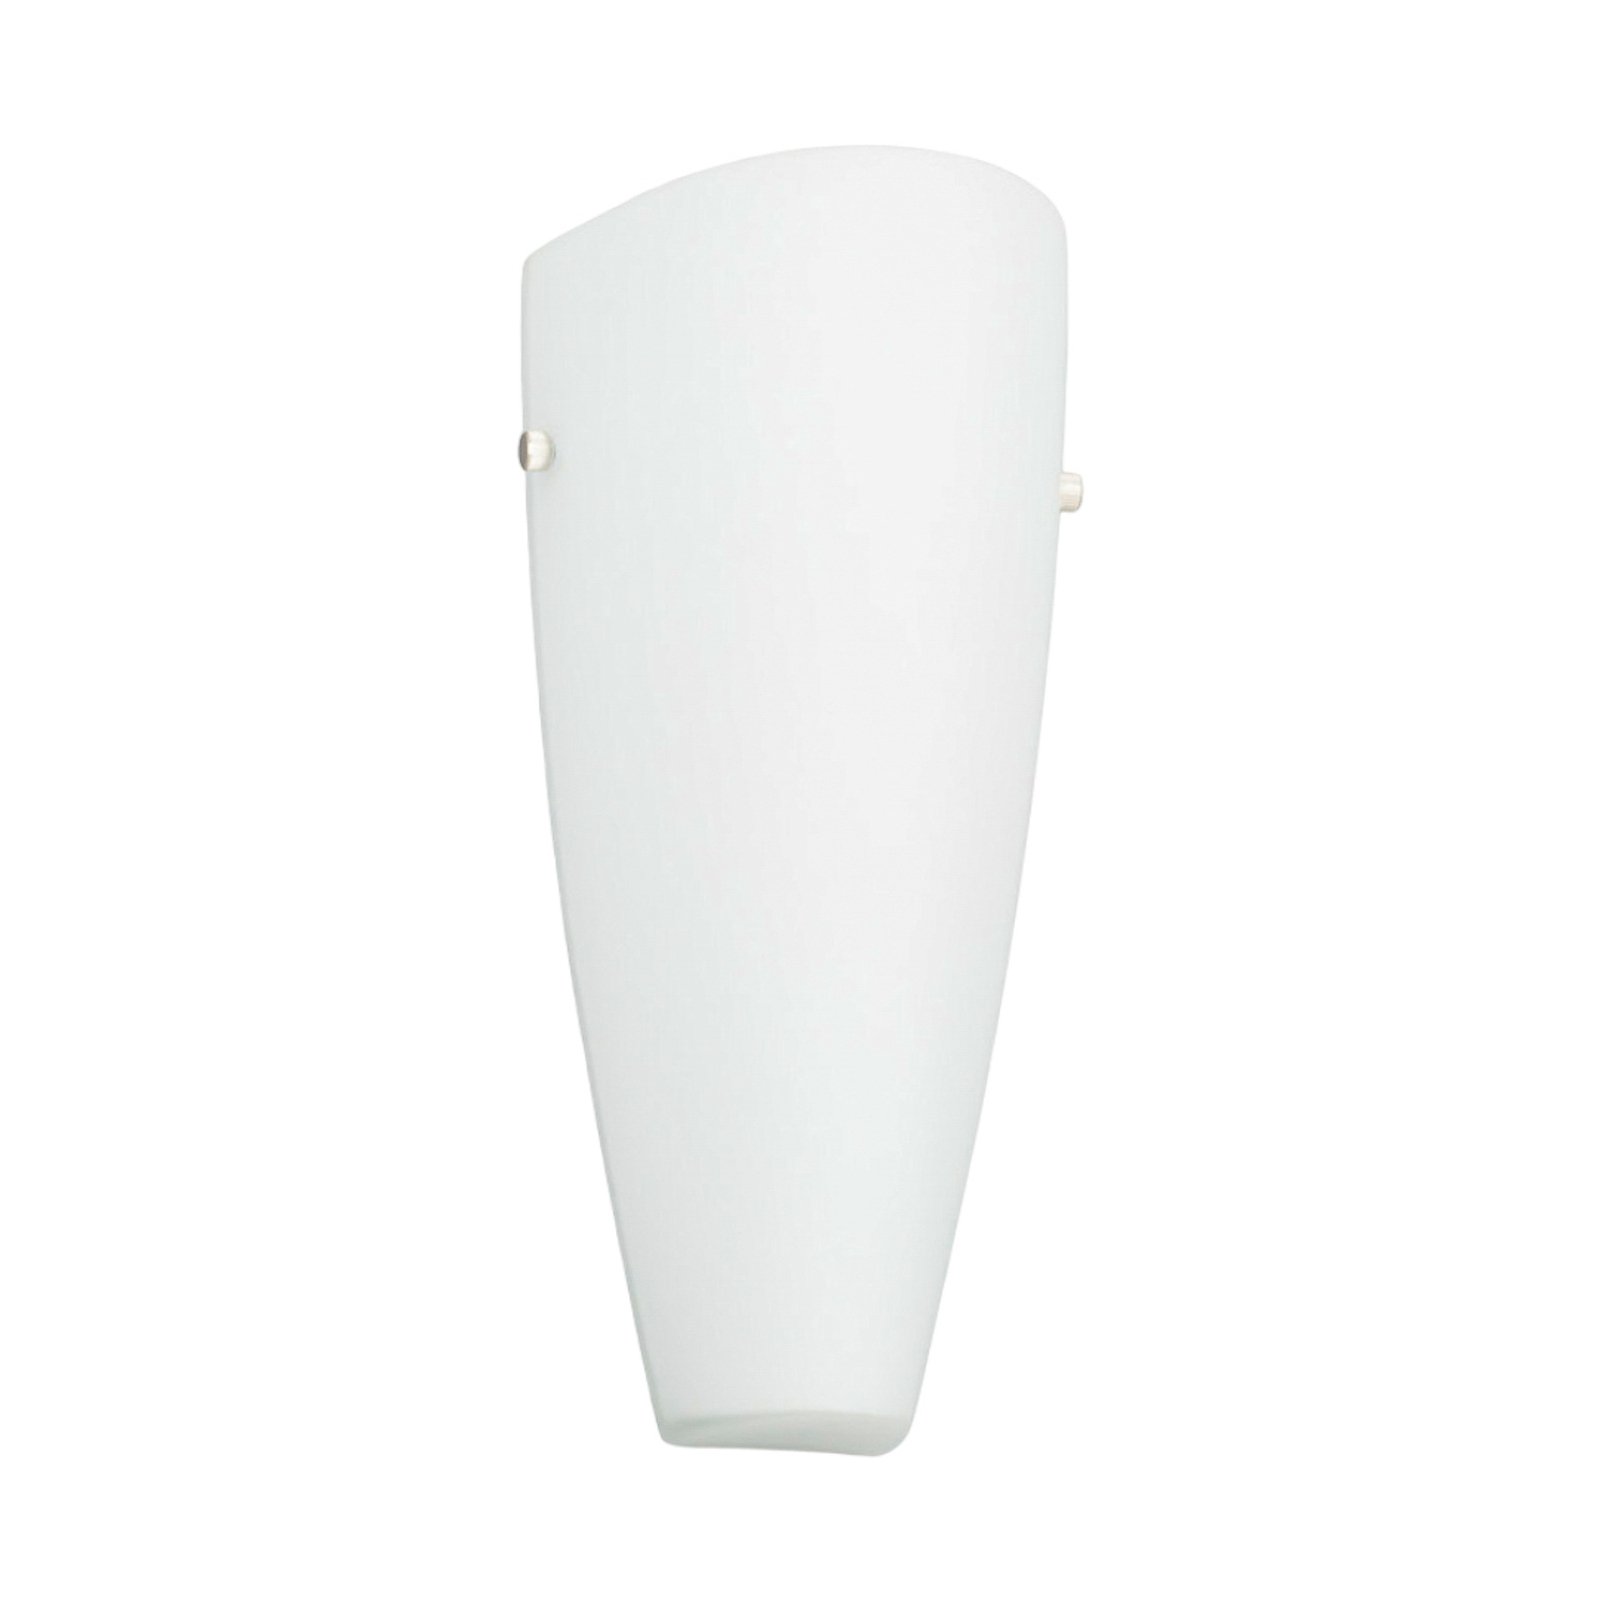 Glass wall light Hermine in white